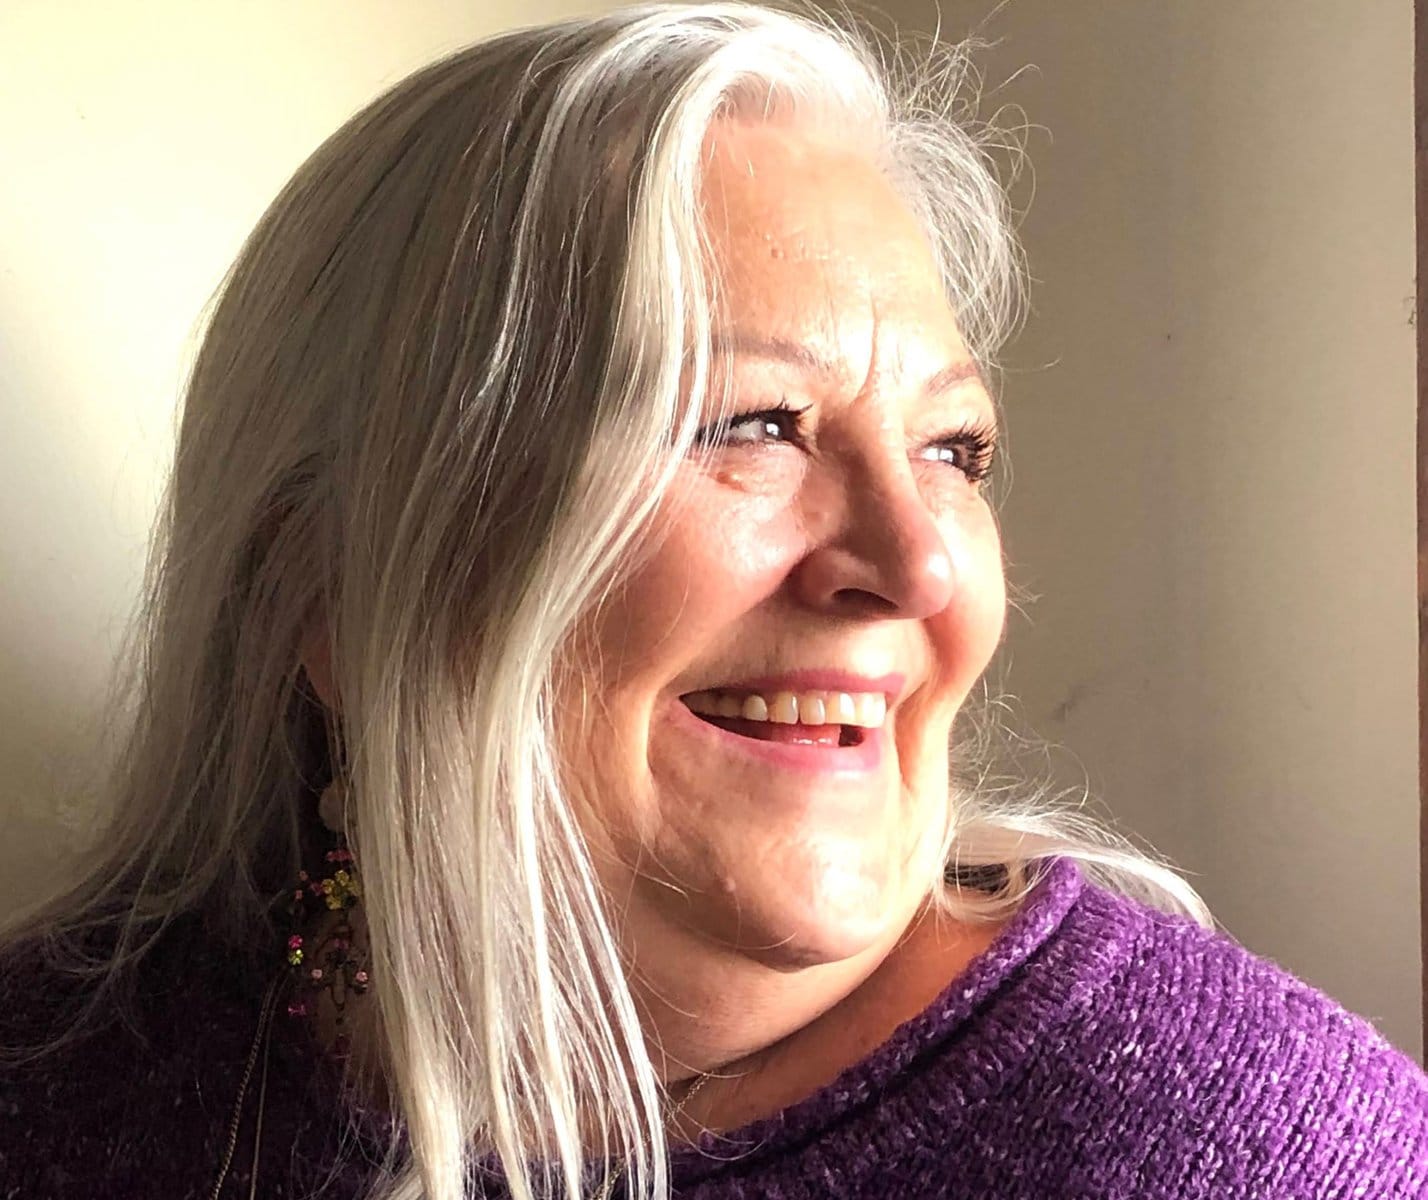 image description: a three-quarters portrait of white woman with long grey hair; she is smiling